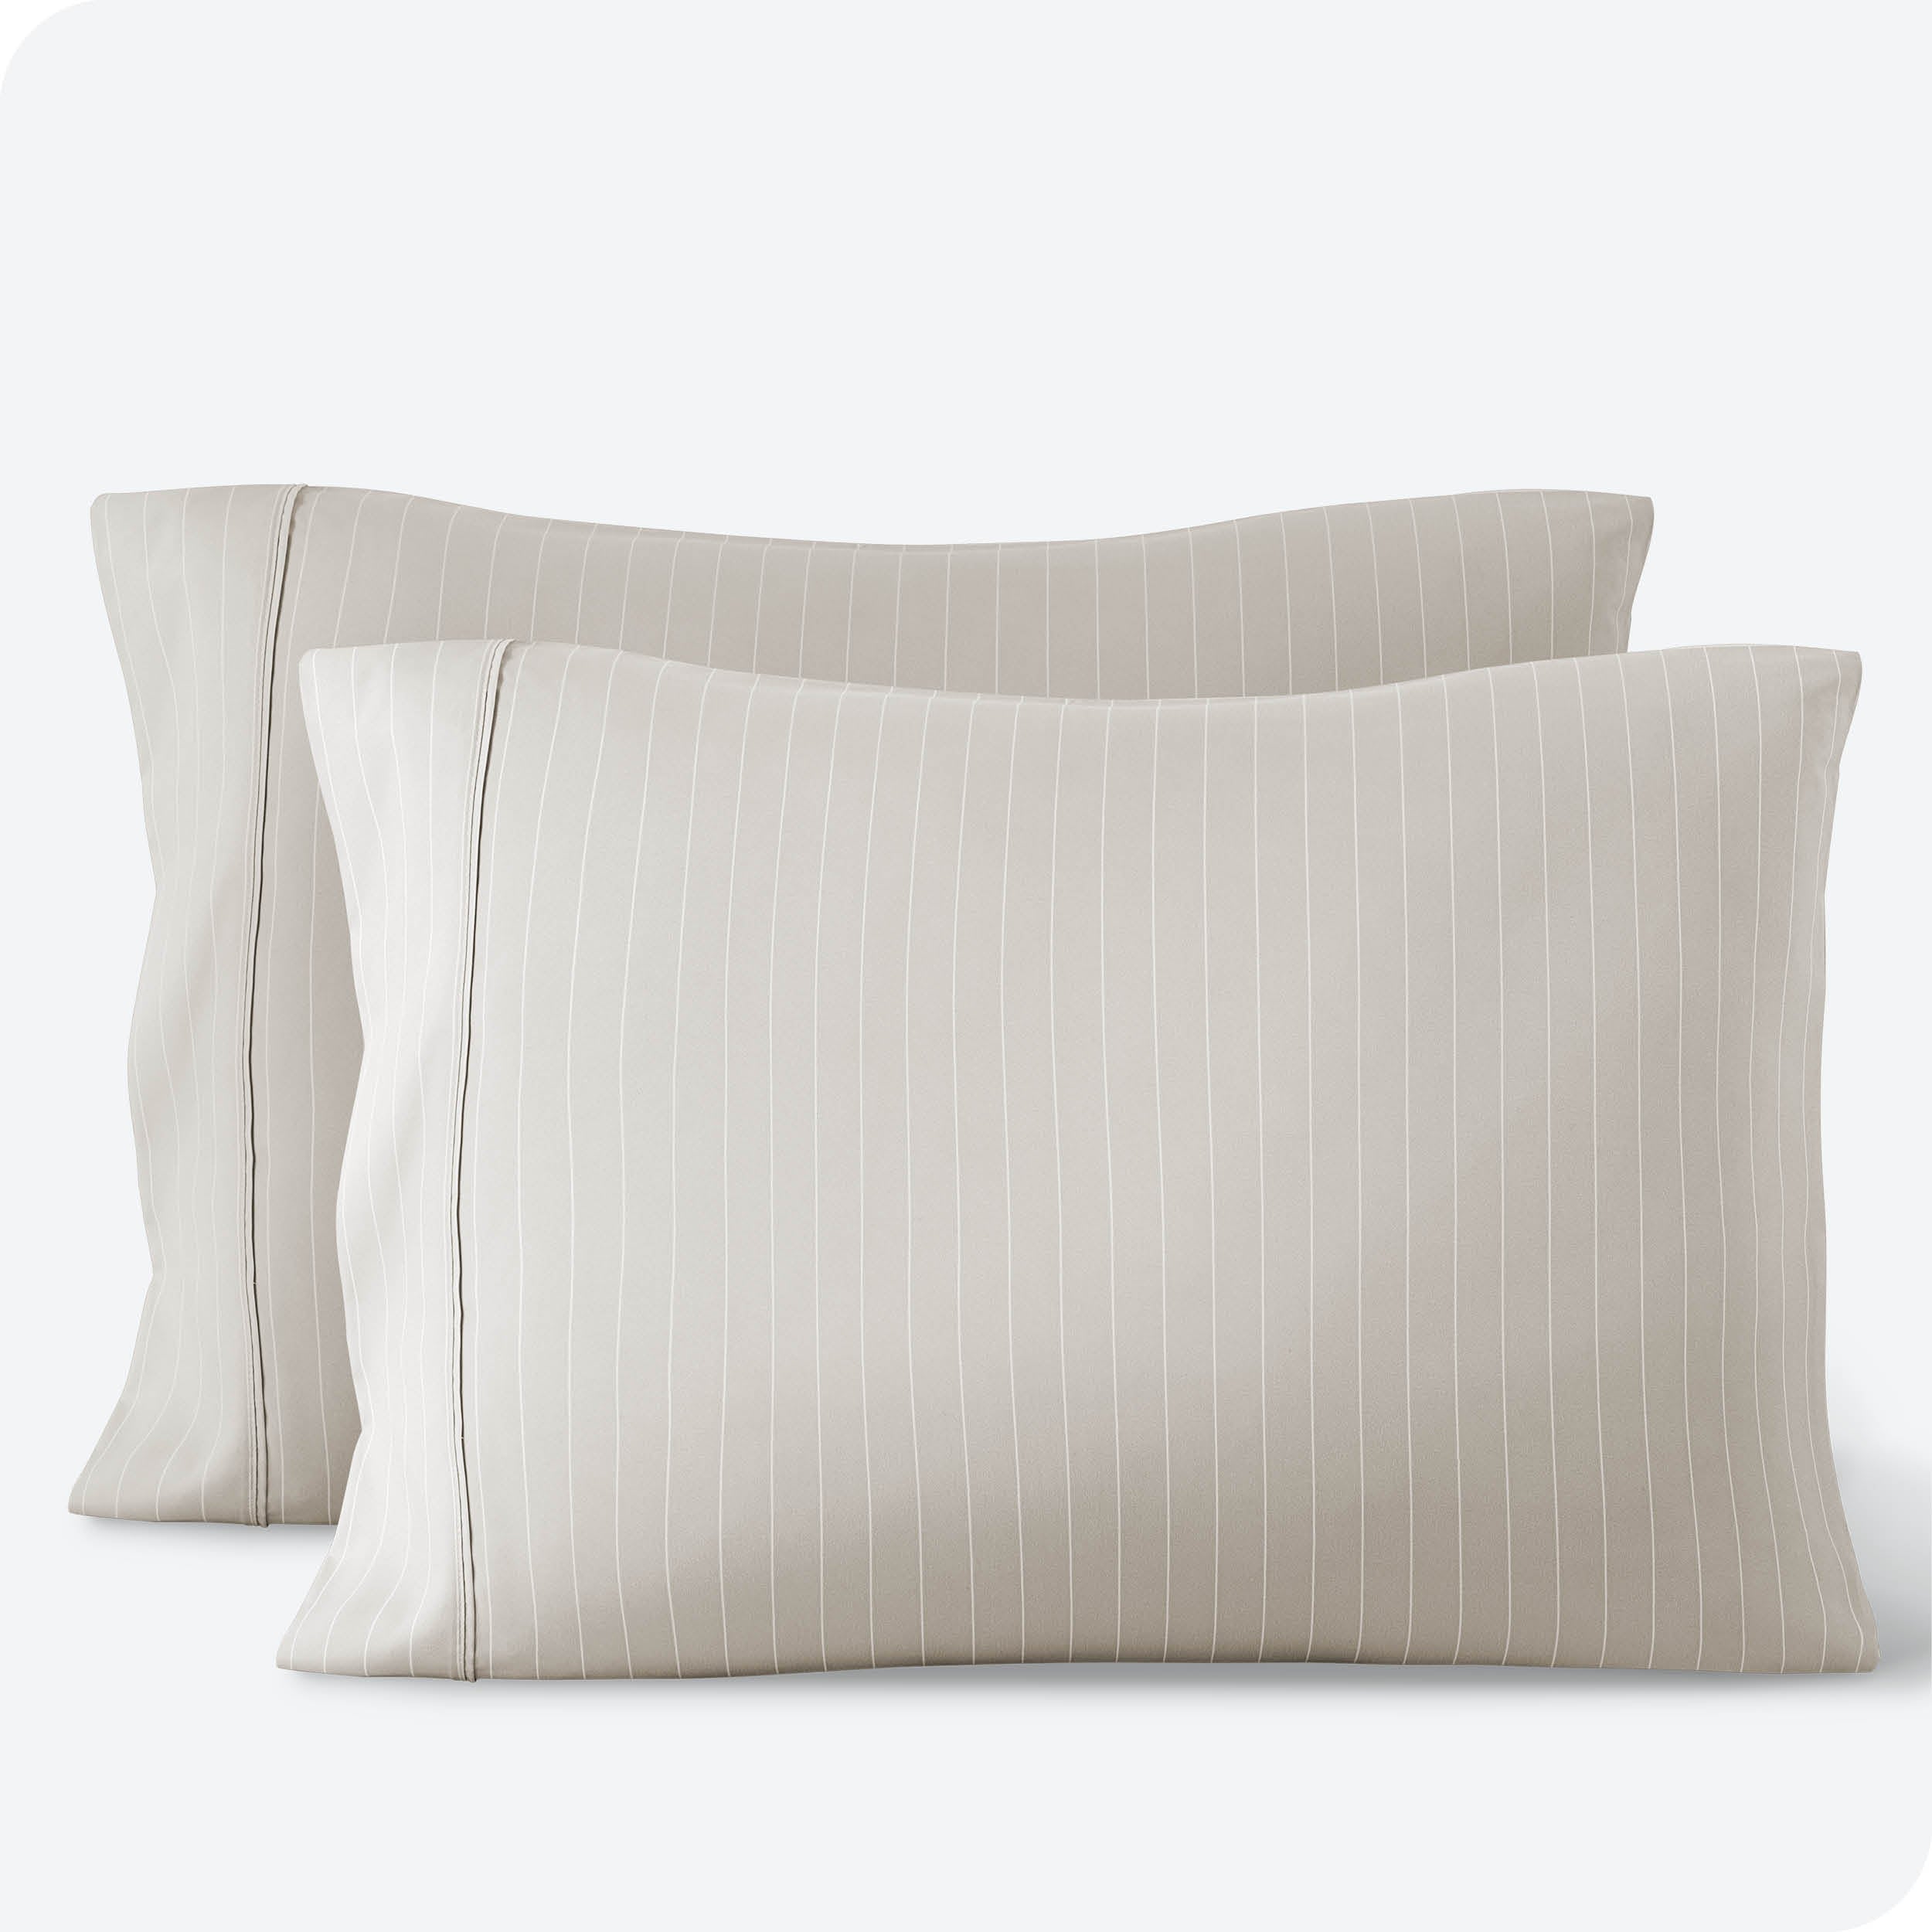 Two pillows on a white background with print pillowcases on them